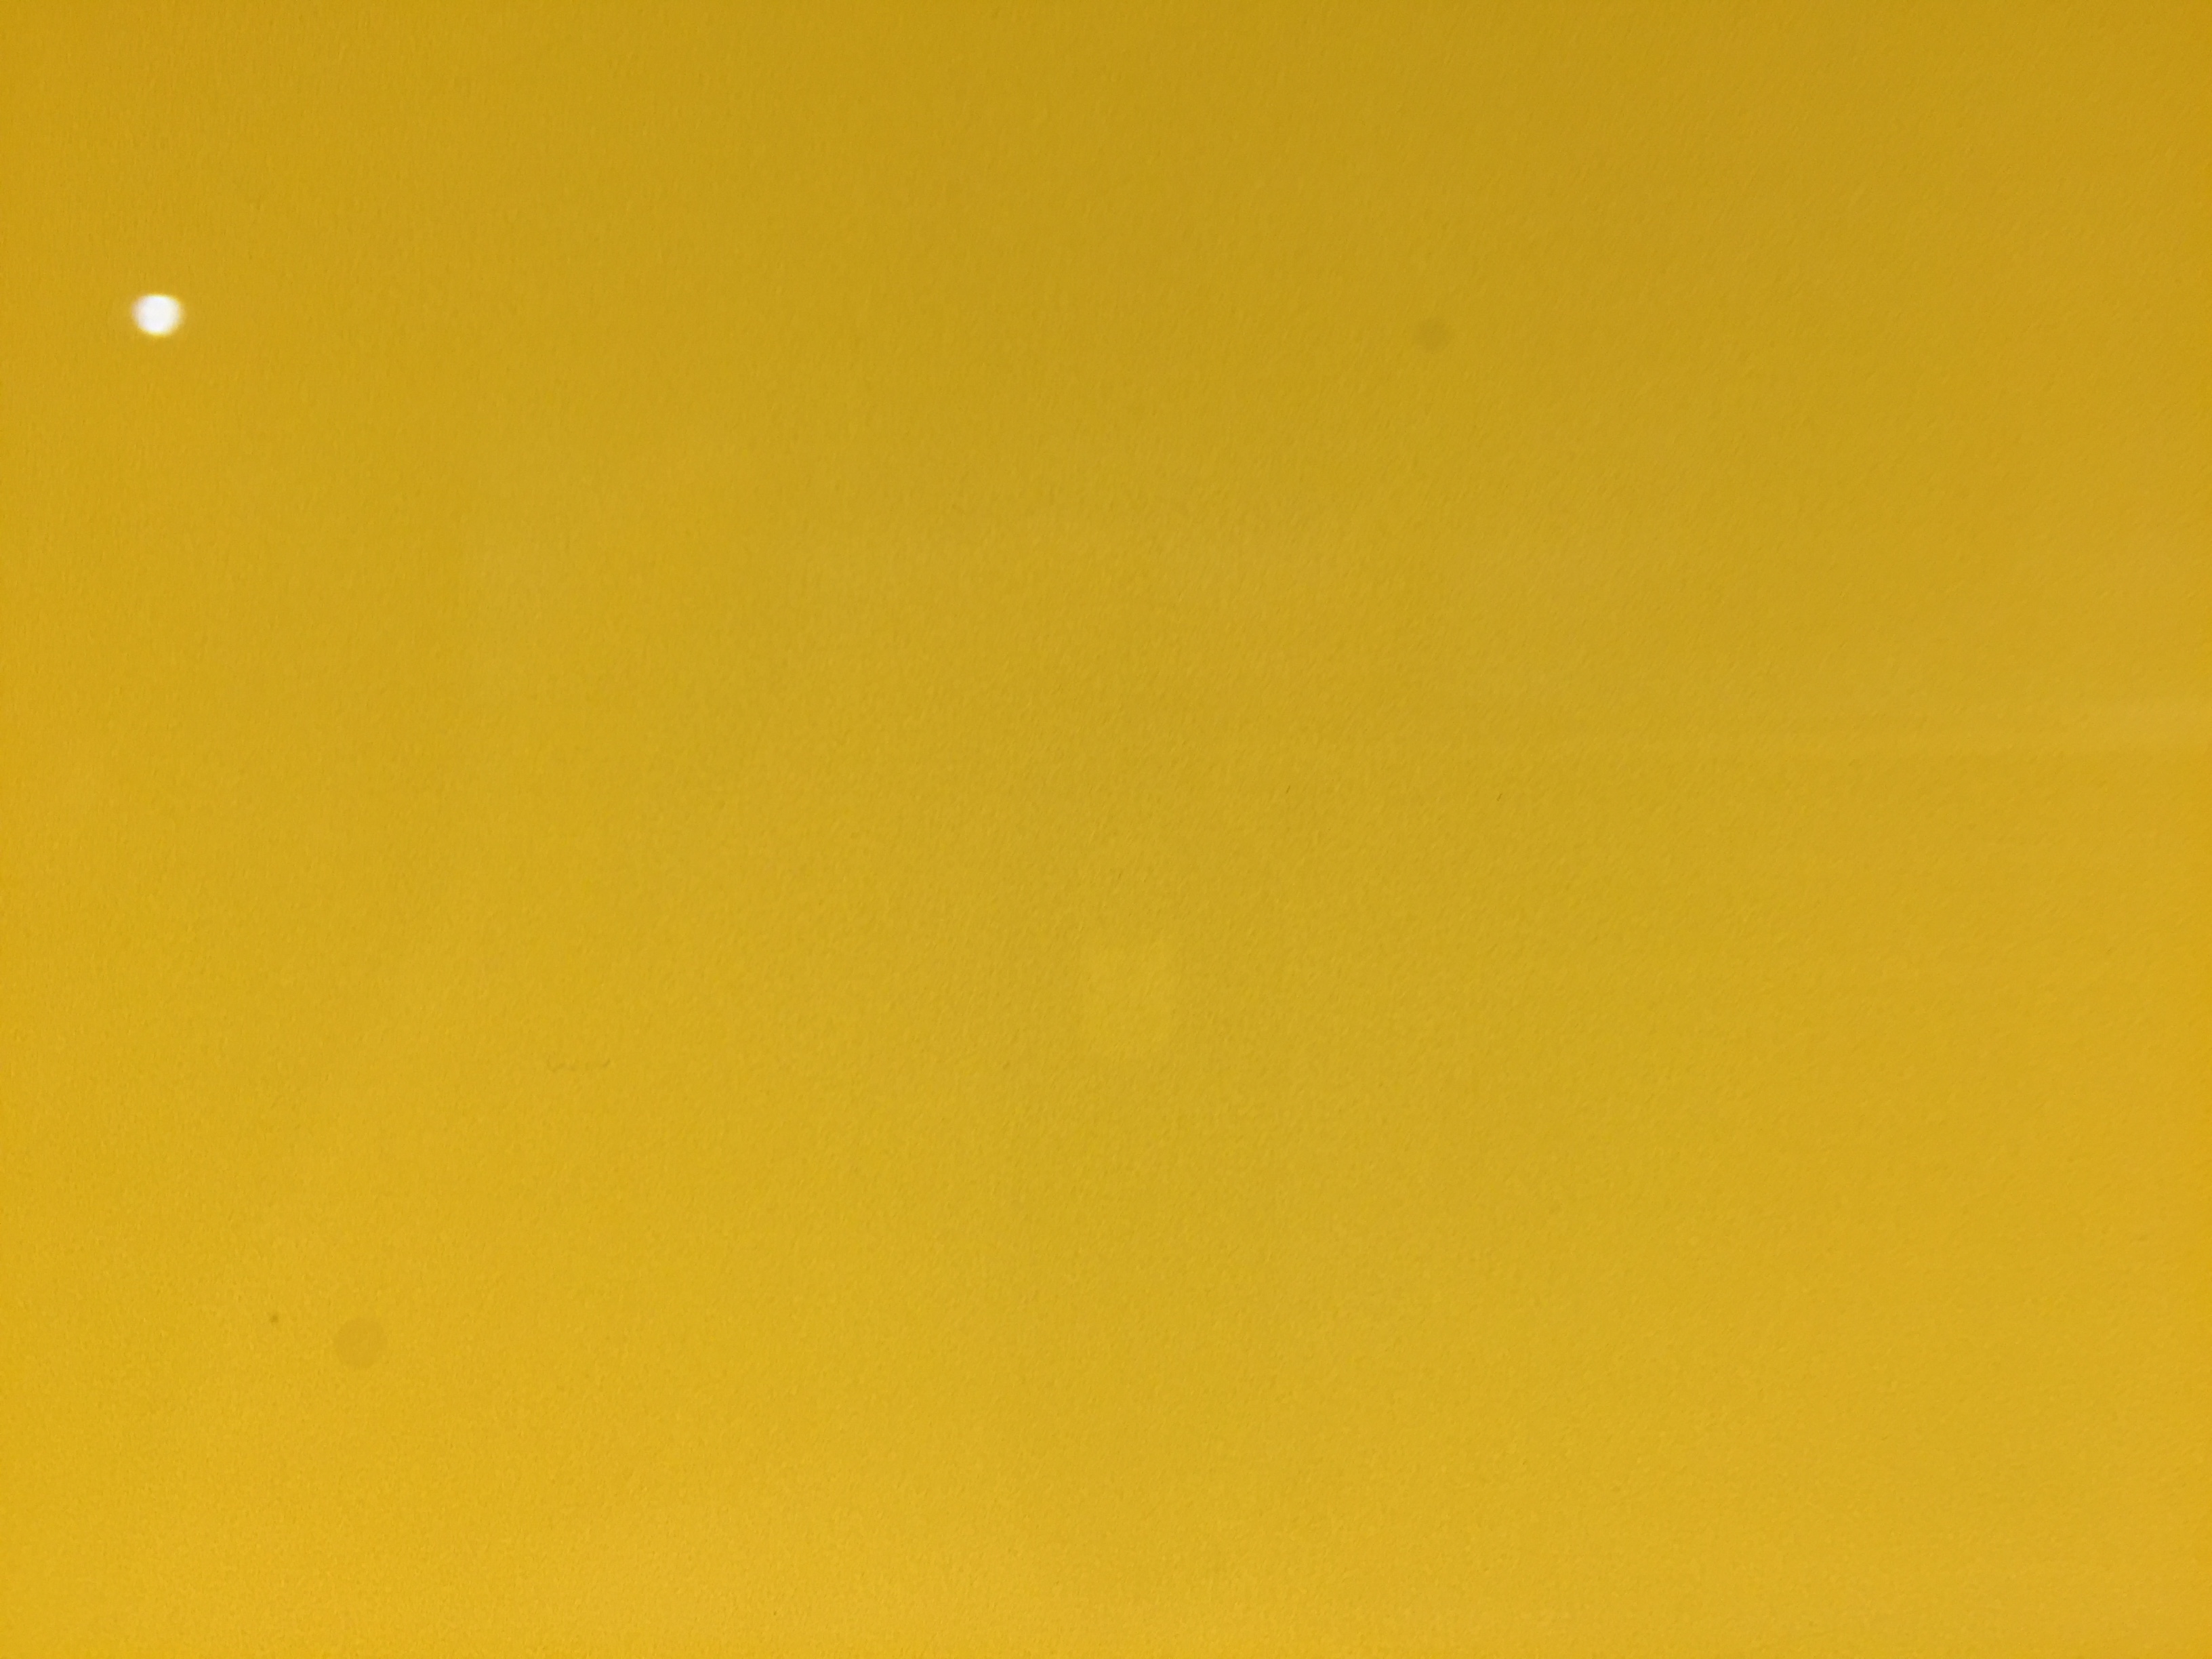 Bright yellow paper | Free Textures